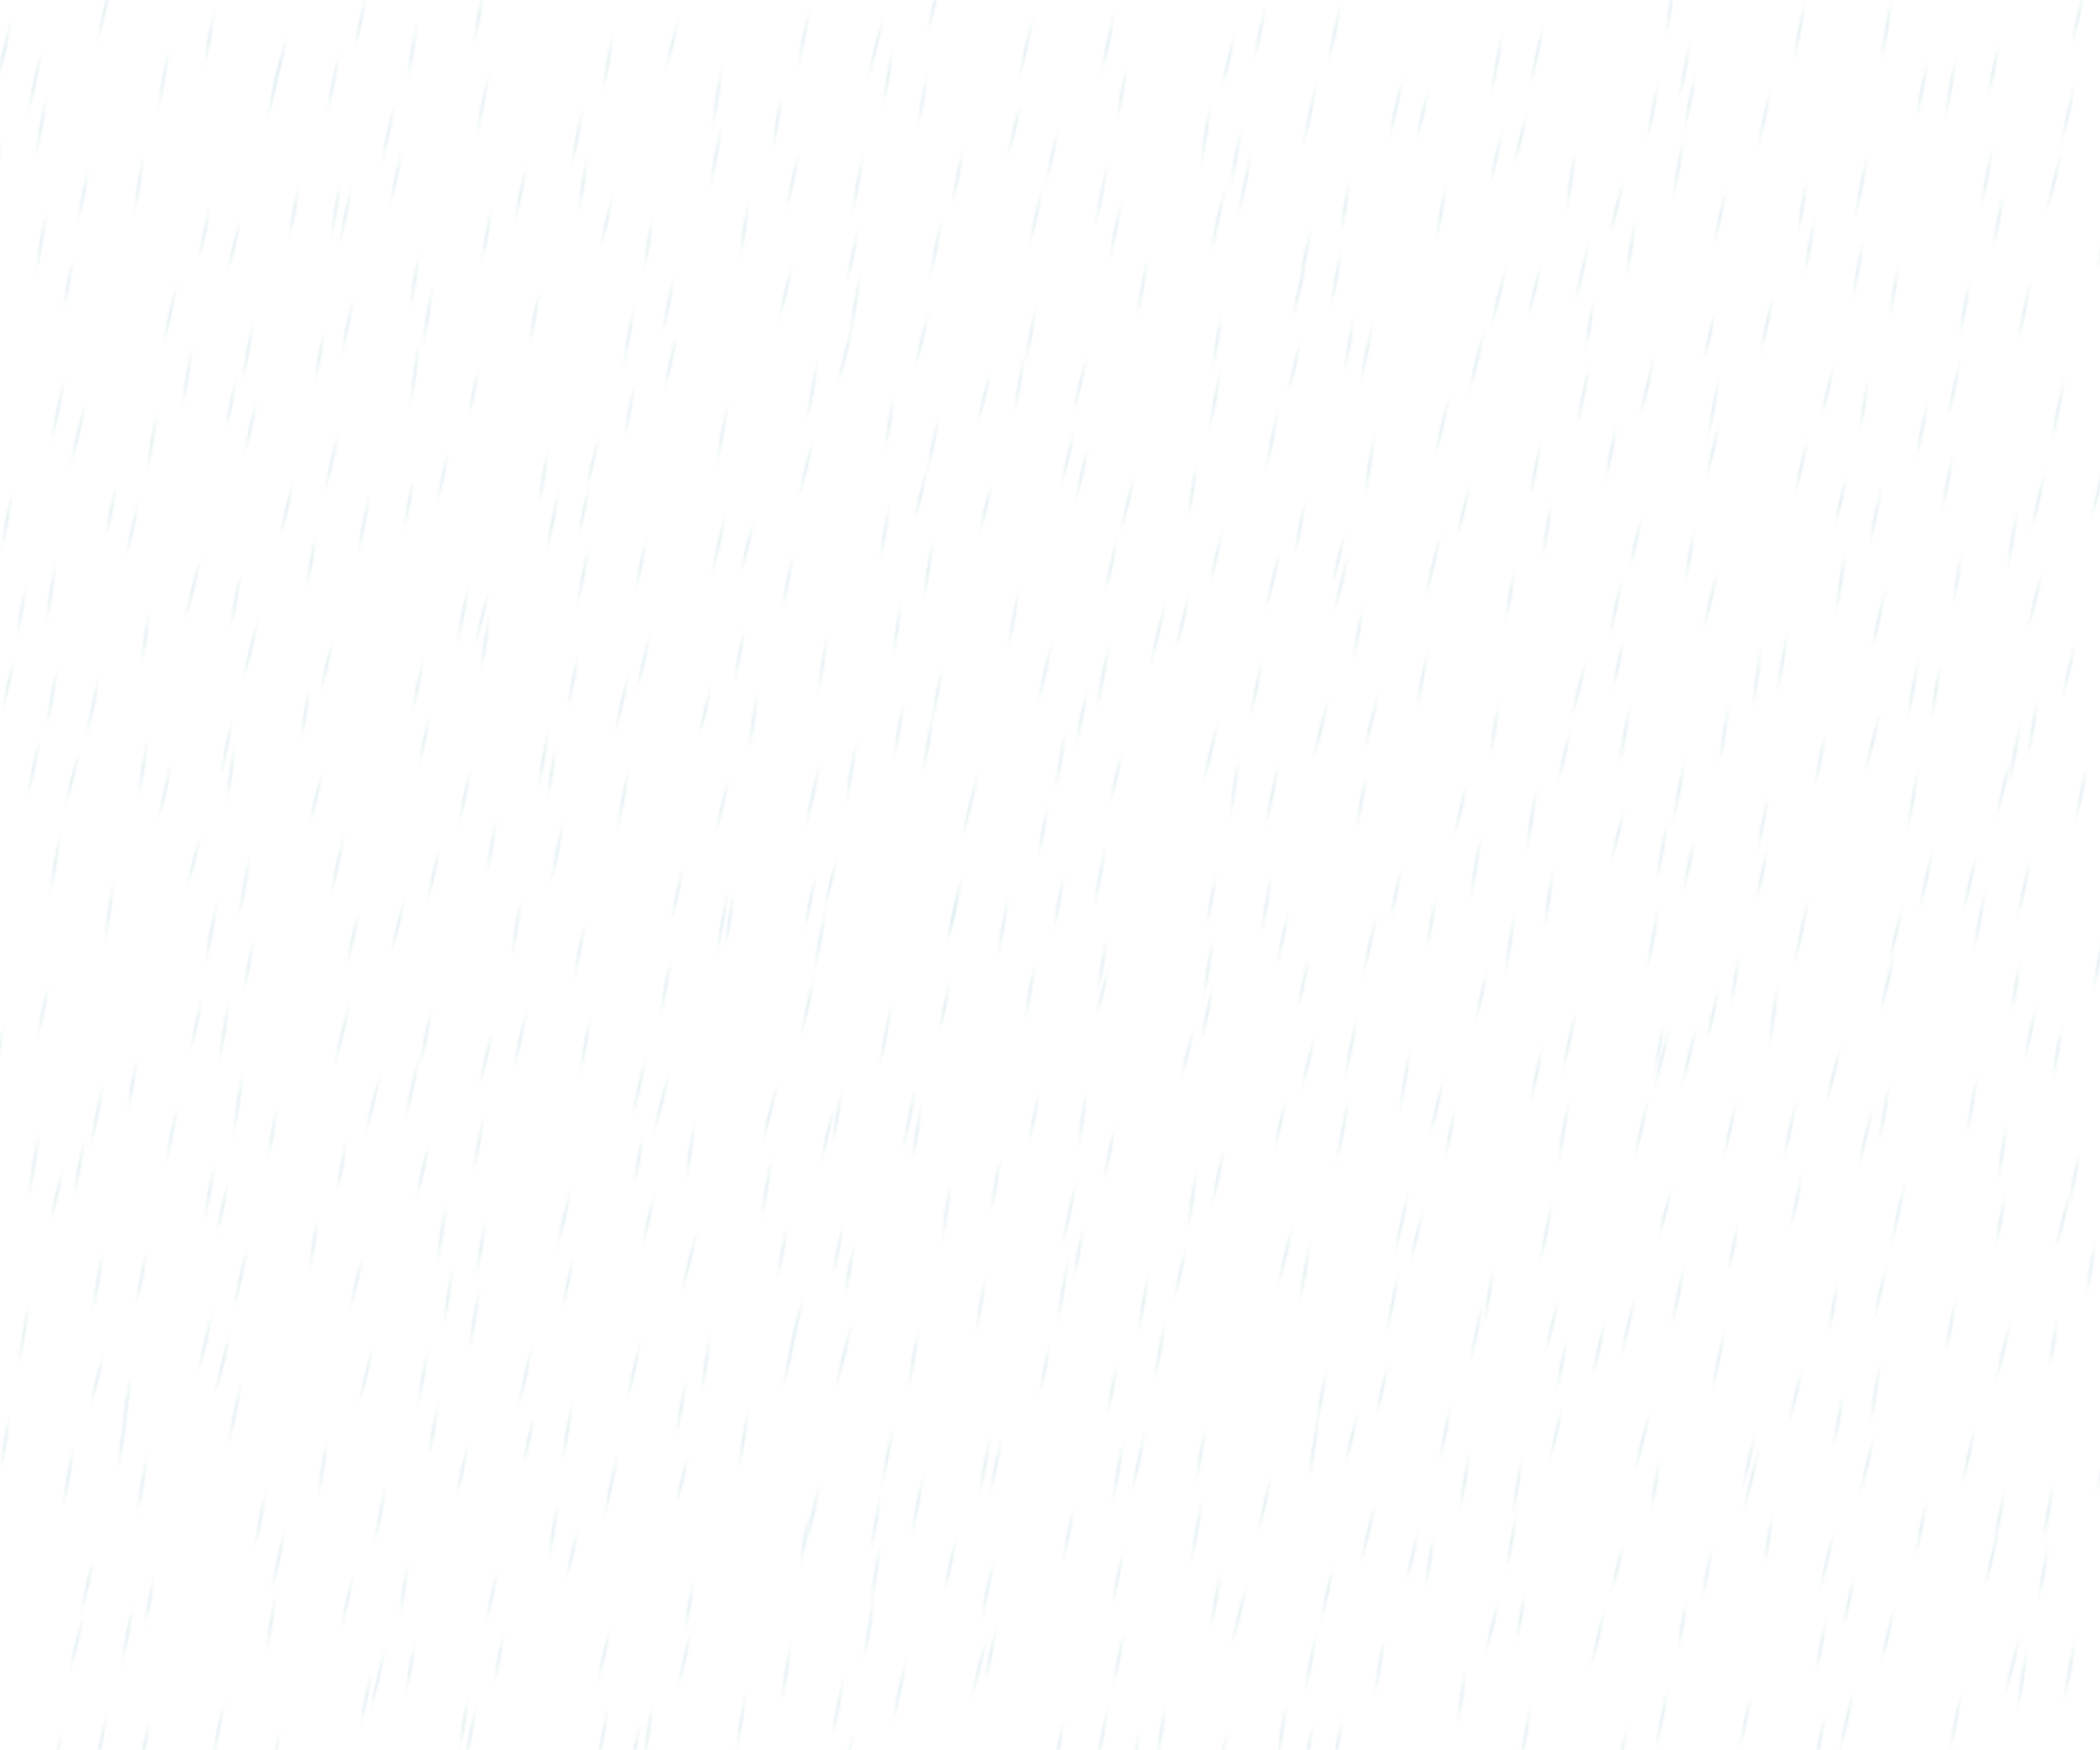 Wet clipart wet weather. Rain png images free